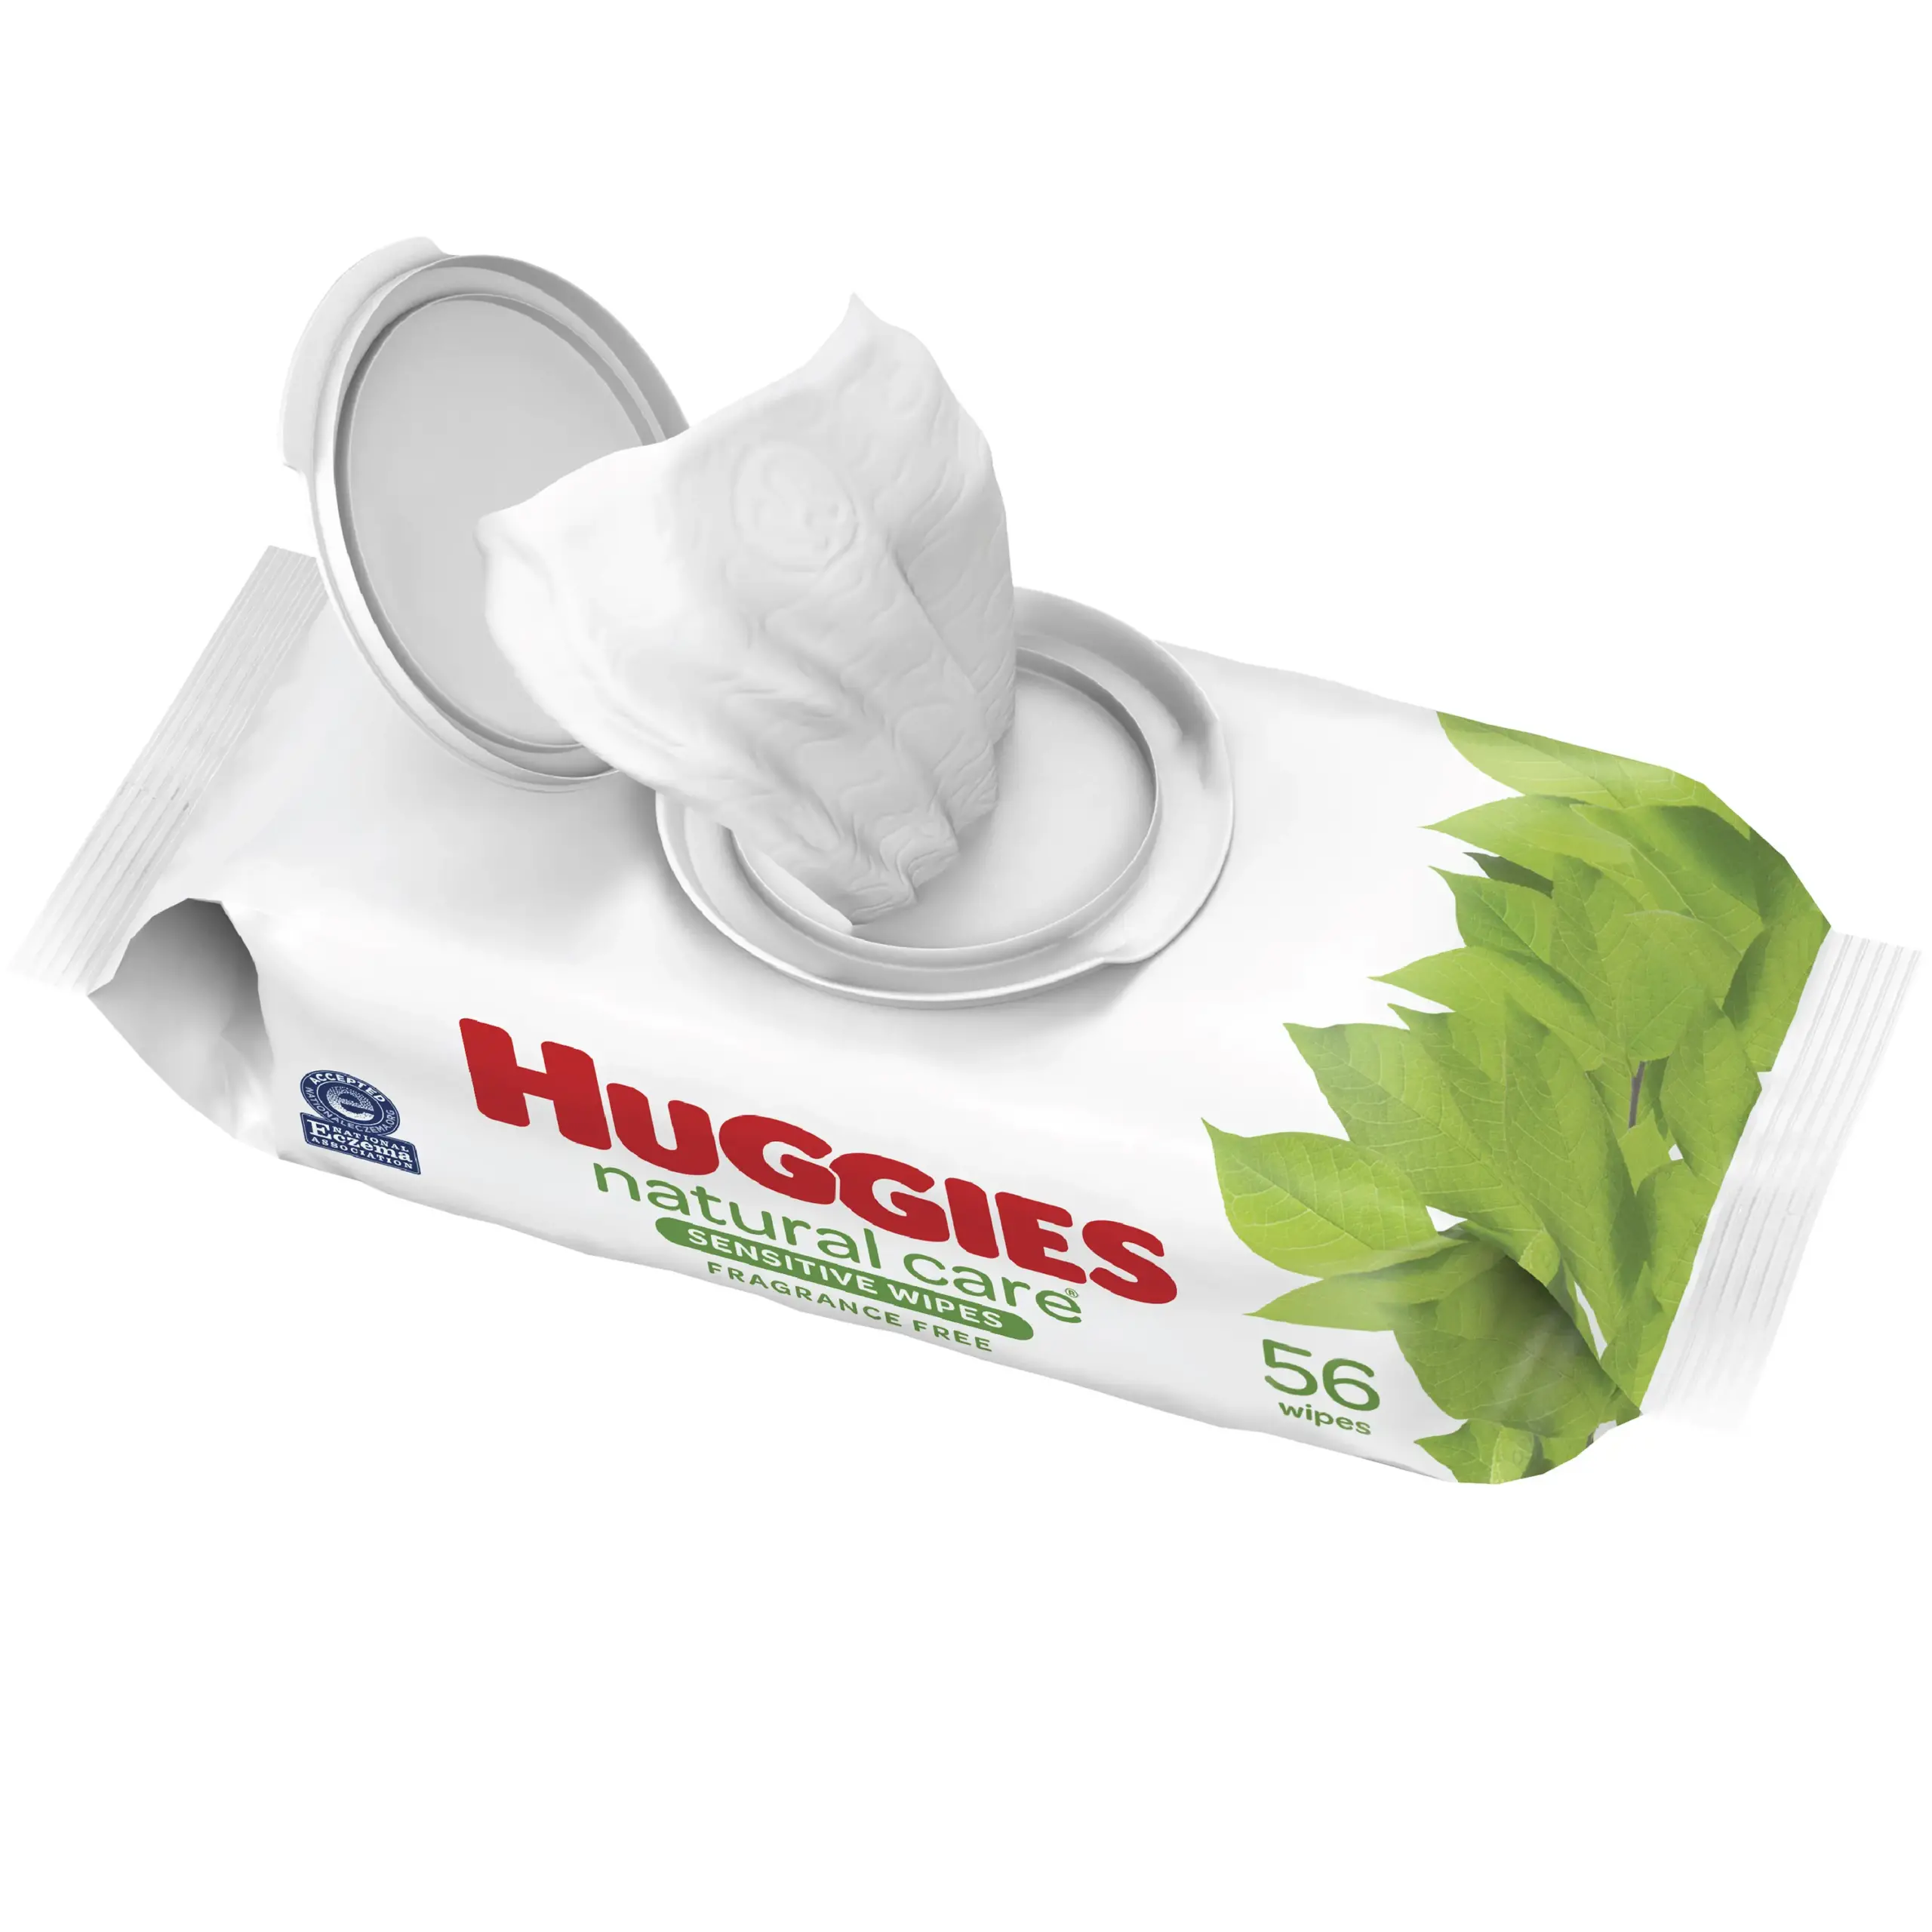 Huggies Natural Care Fragrance Free Baby Wipes - Replaces 6939301